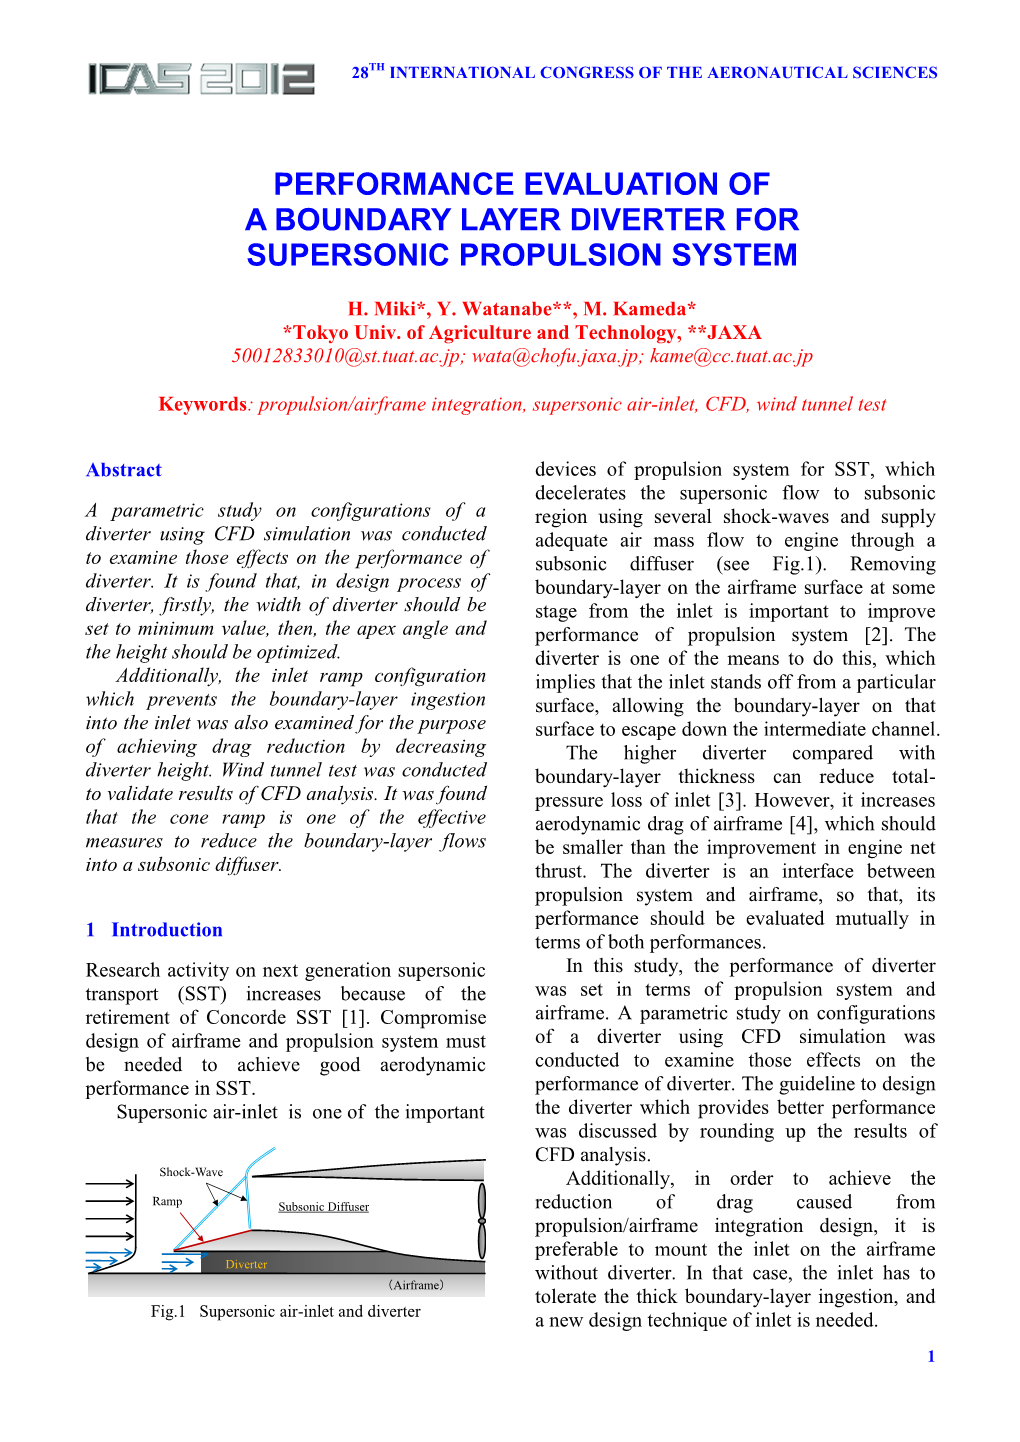 Performance Evaluation of a Boundary Layer Diverter for Supersonic Propulsion System